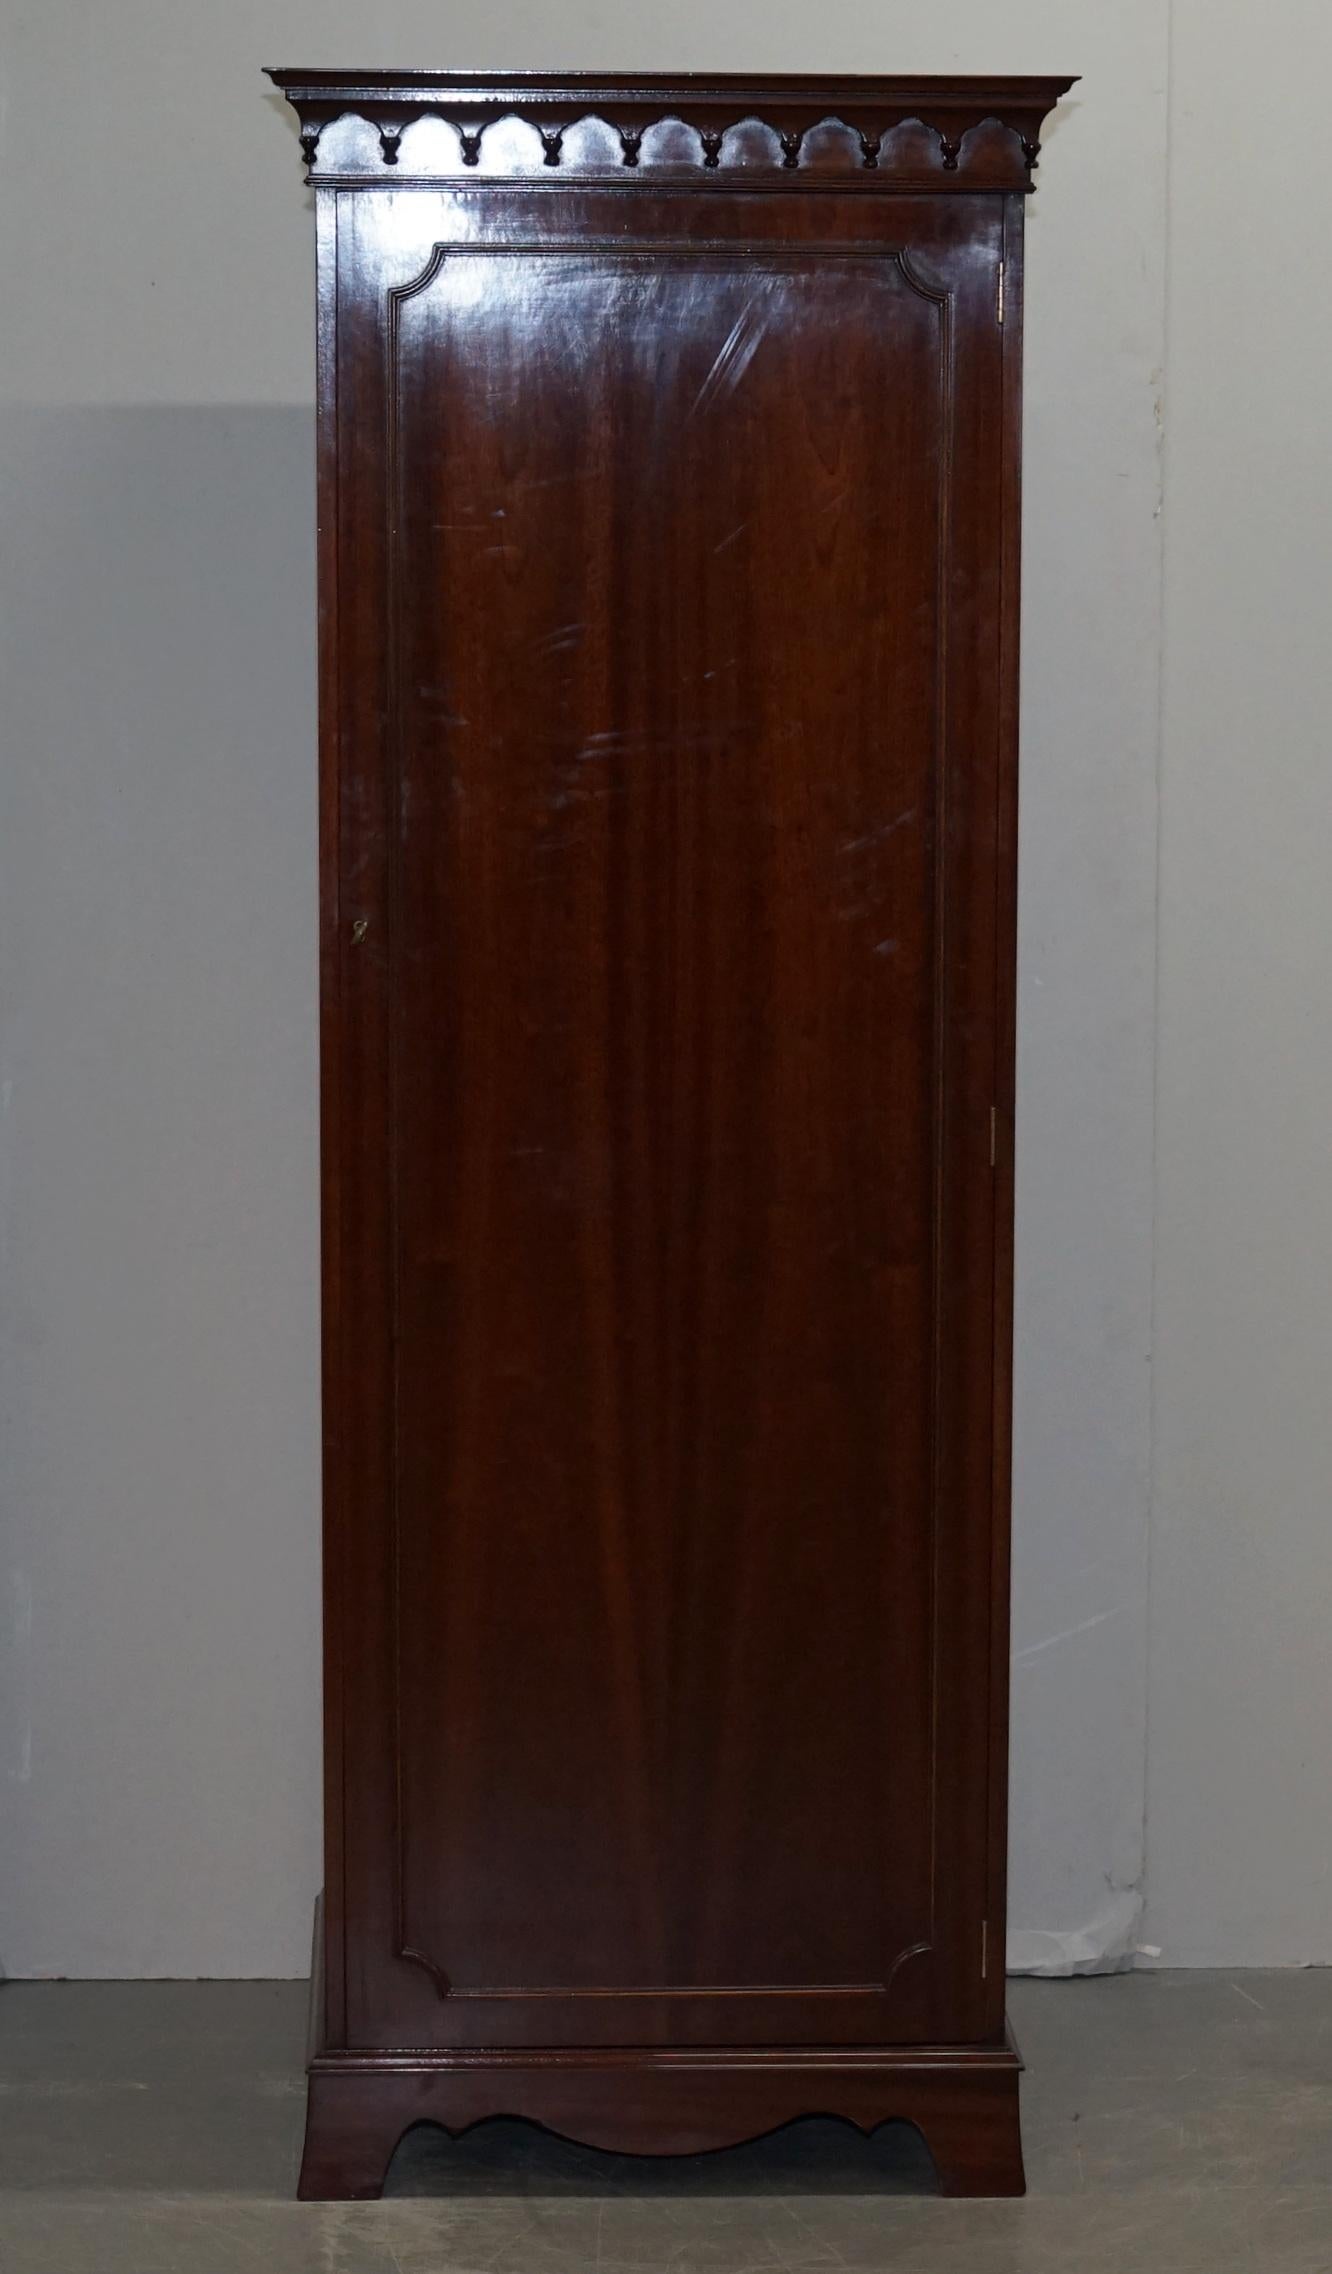 We are delighted to offer for sale this lovely new old stock Bevan Funnel mahogany hall cupboard or single wardrobe with height adjustable shelves

A good looking and well made luxury hall cupboard or wardrobe in mahogany, hand made in England by